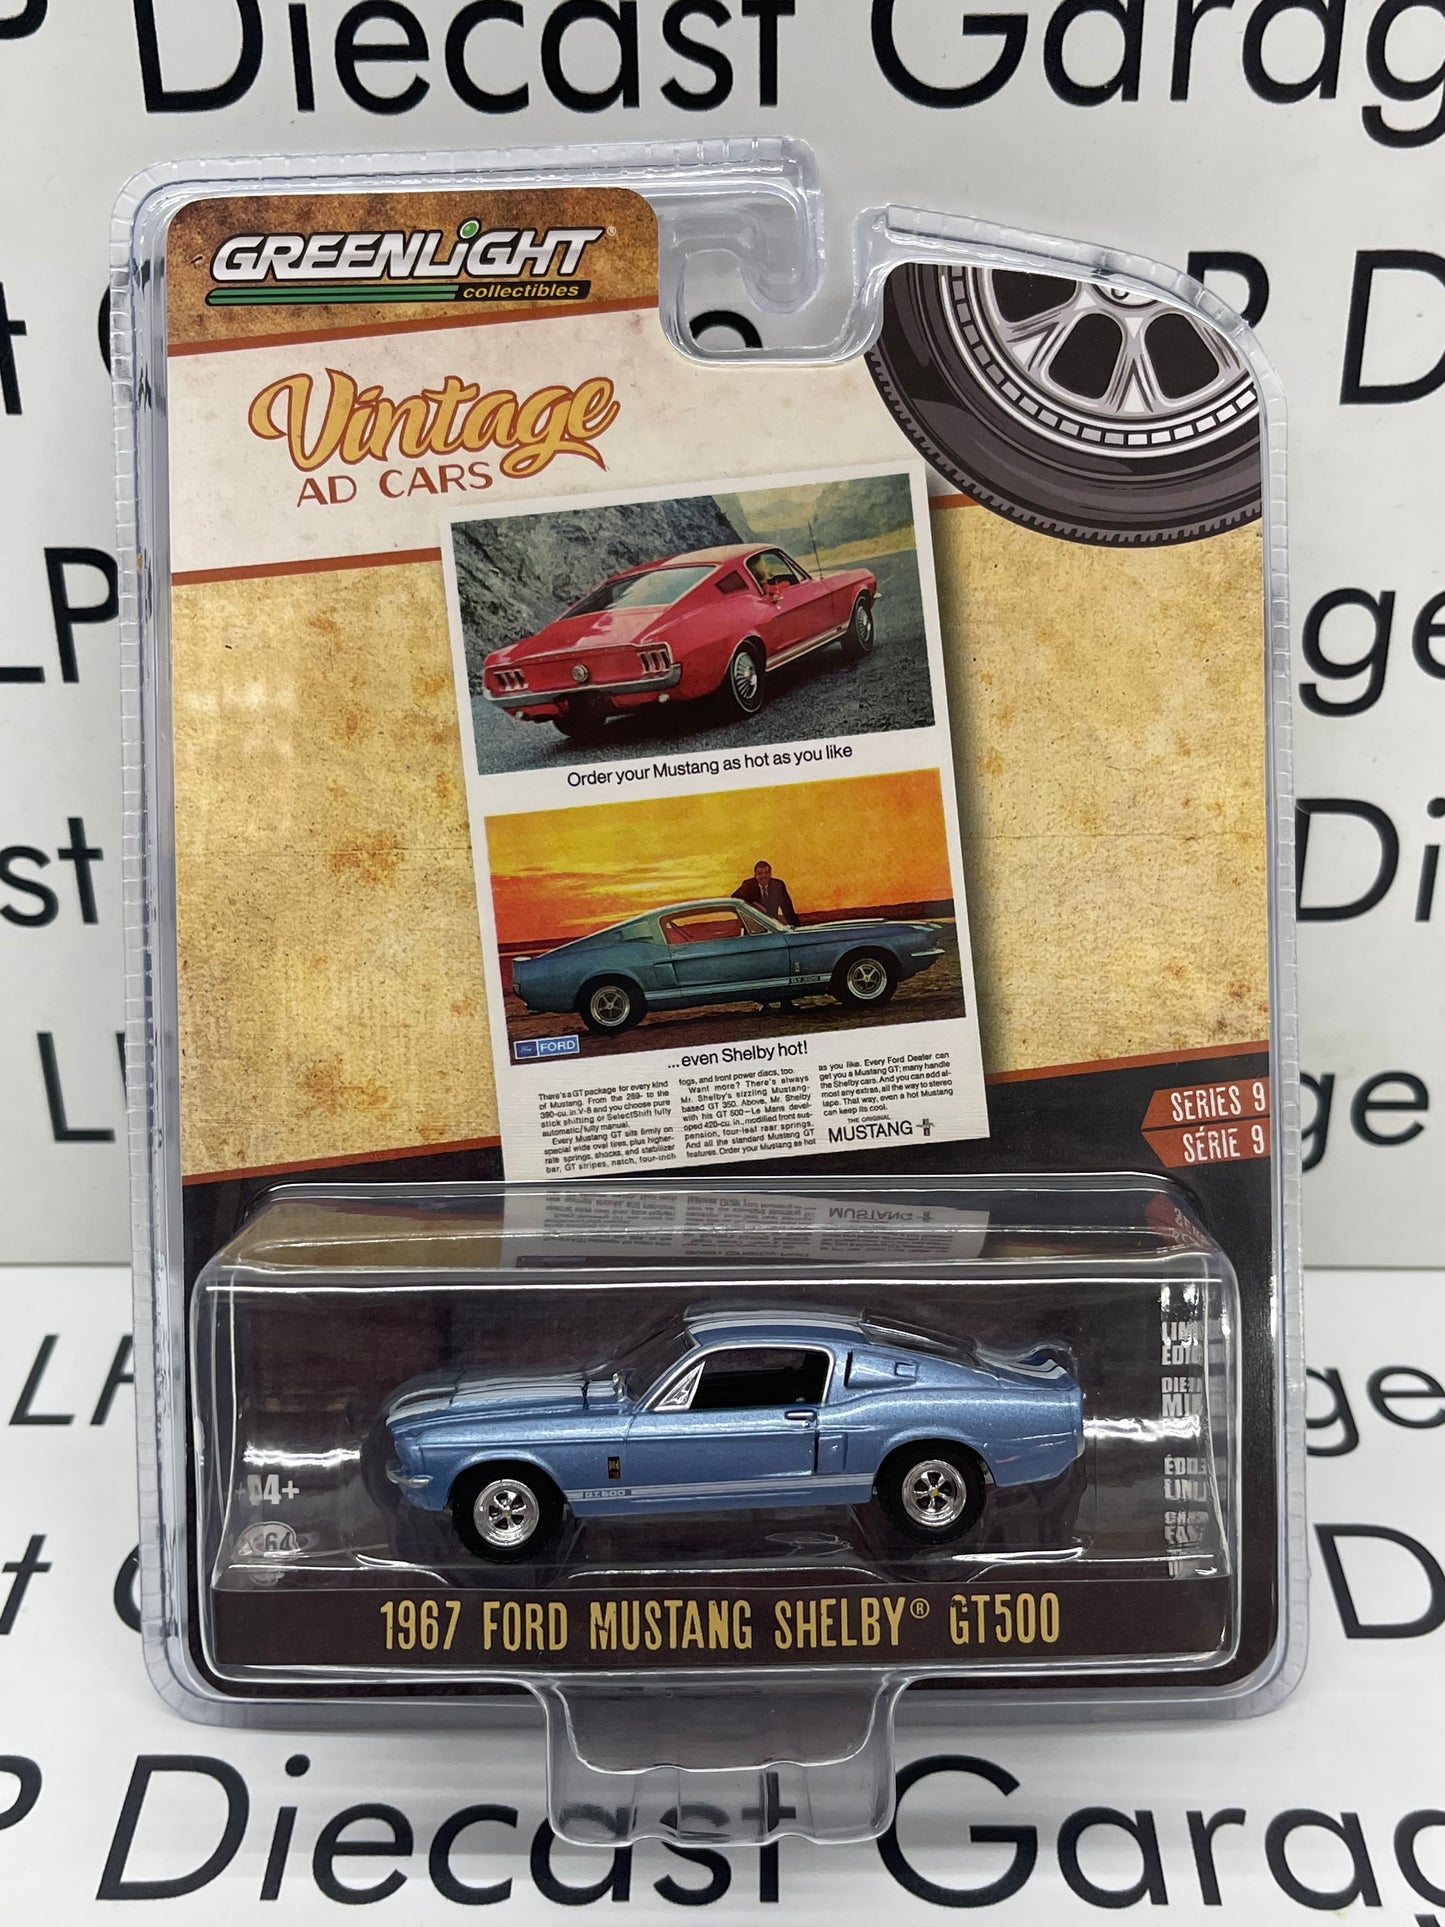 GREENLIGHT 1967 Ford Mustang Shelby GT500 Blue Vintage Ad Cars 1:64 Diecast